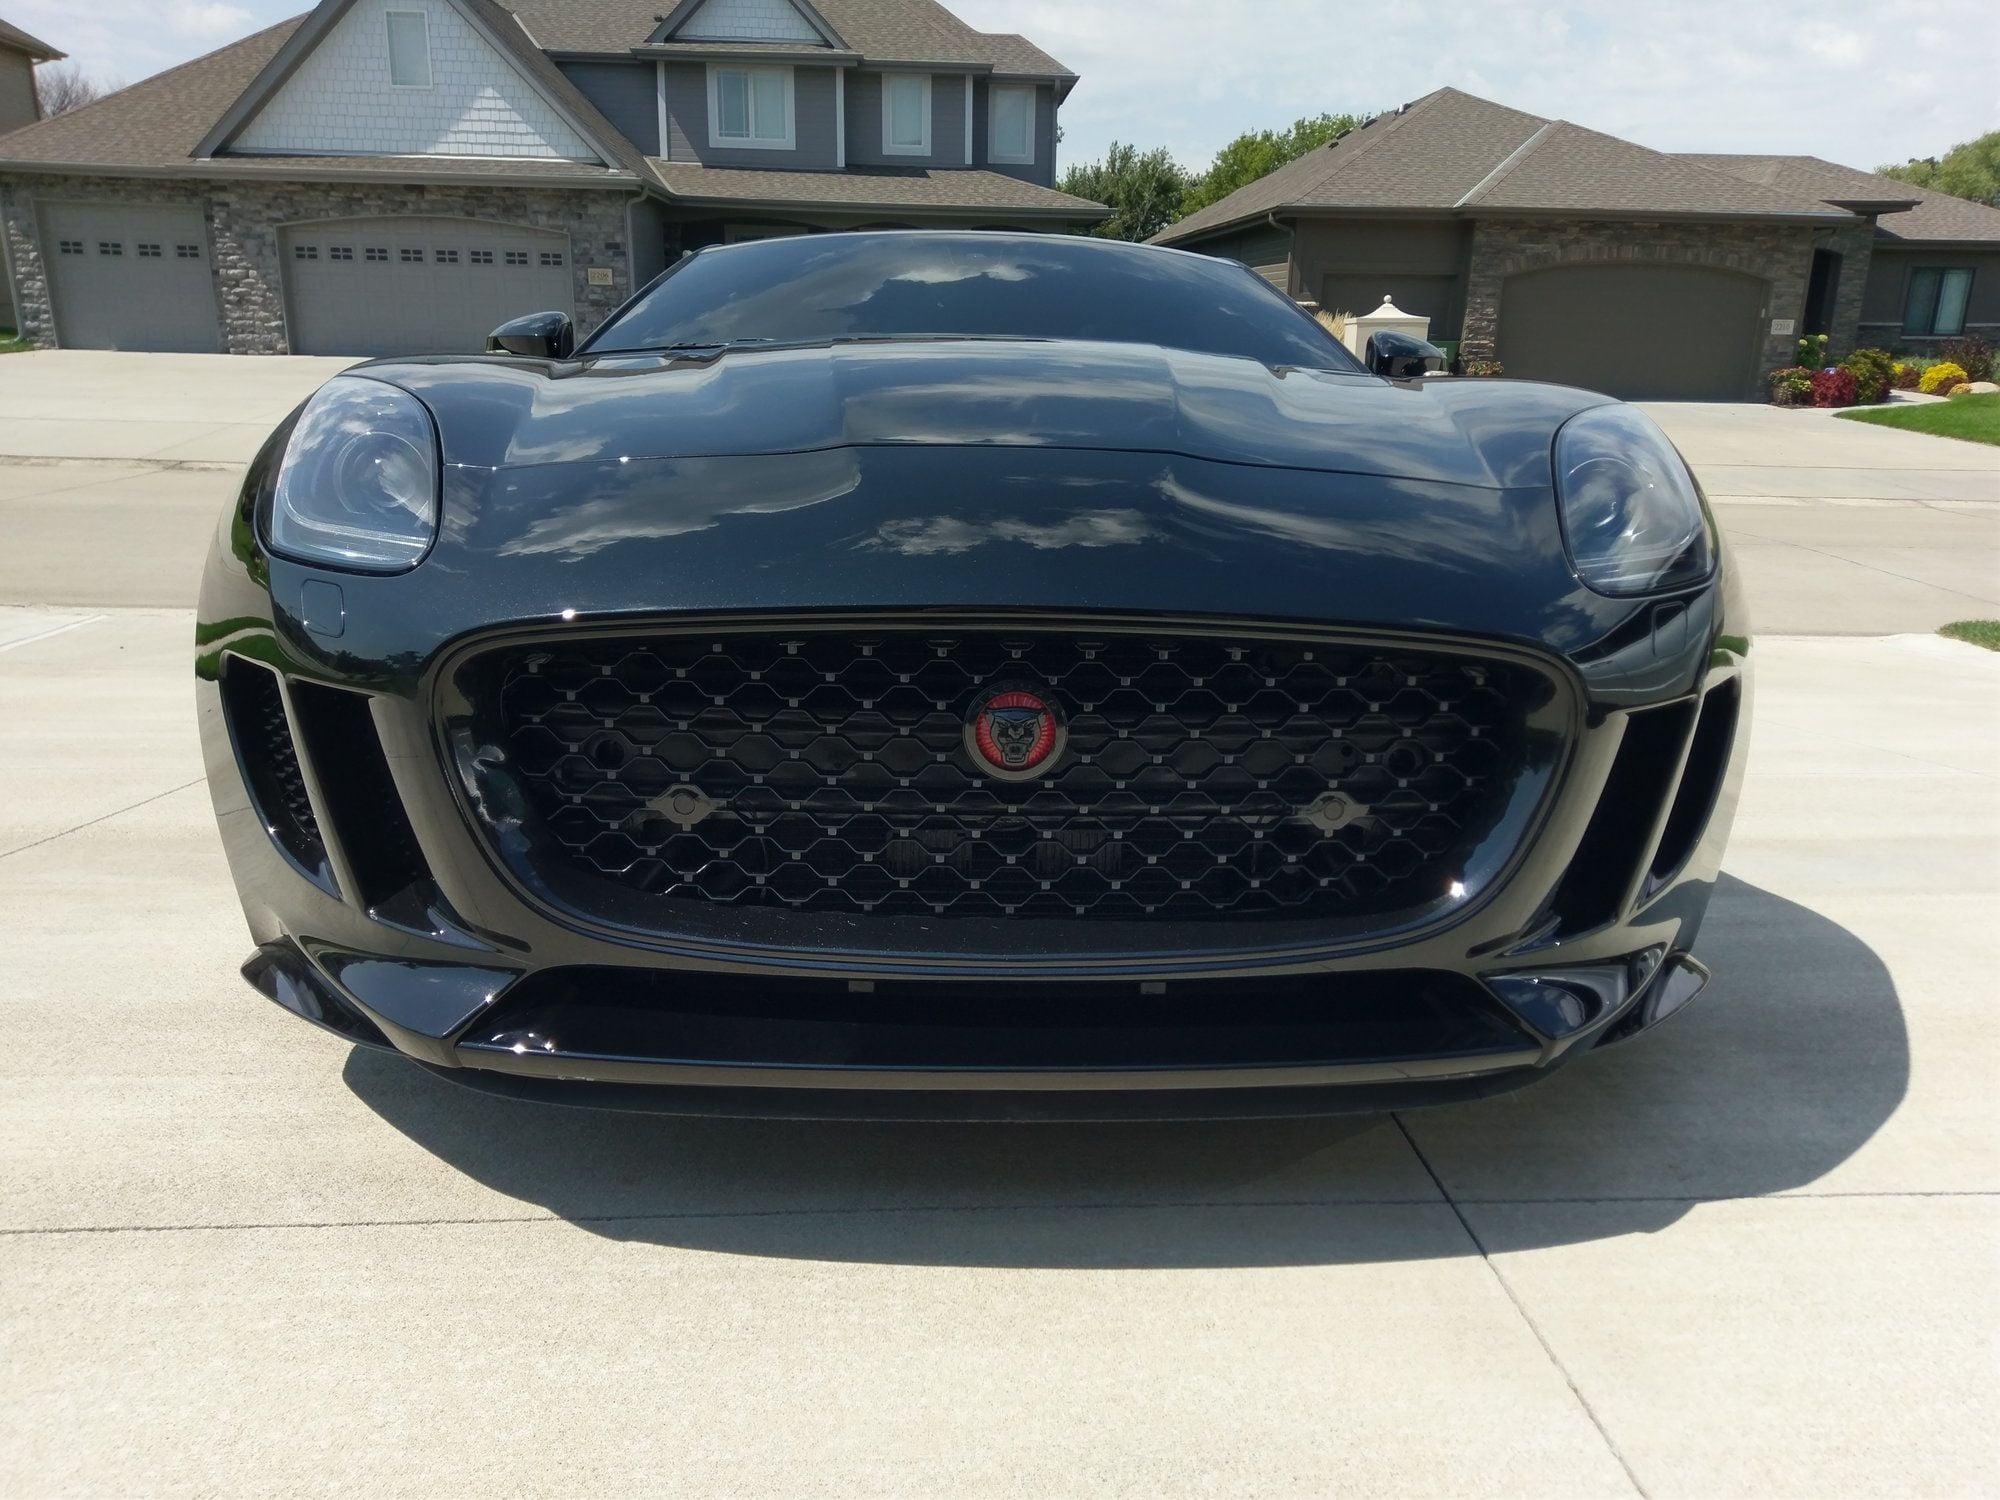 Exterior Body Parts - Project 7 Style Grille - Paramount Performance [New/Unopened] - New - 2014 to 2019 Jaguar F-Type - Sandy, UT 84070, United States